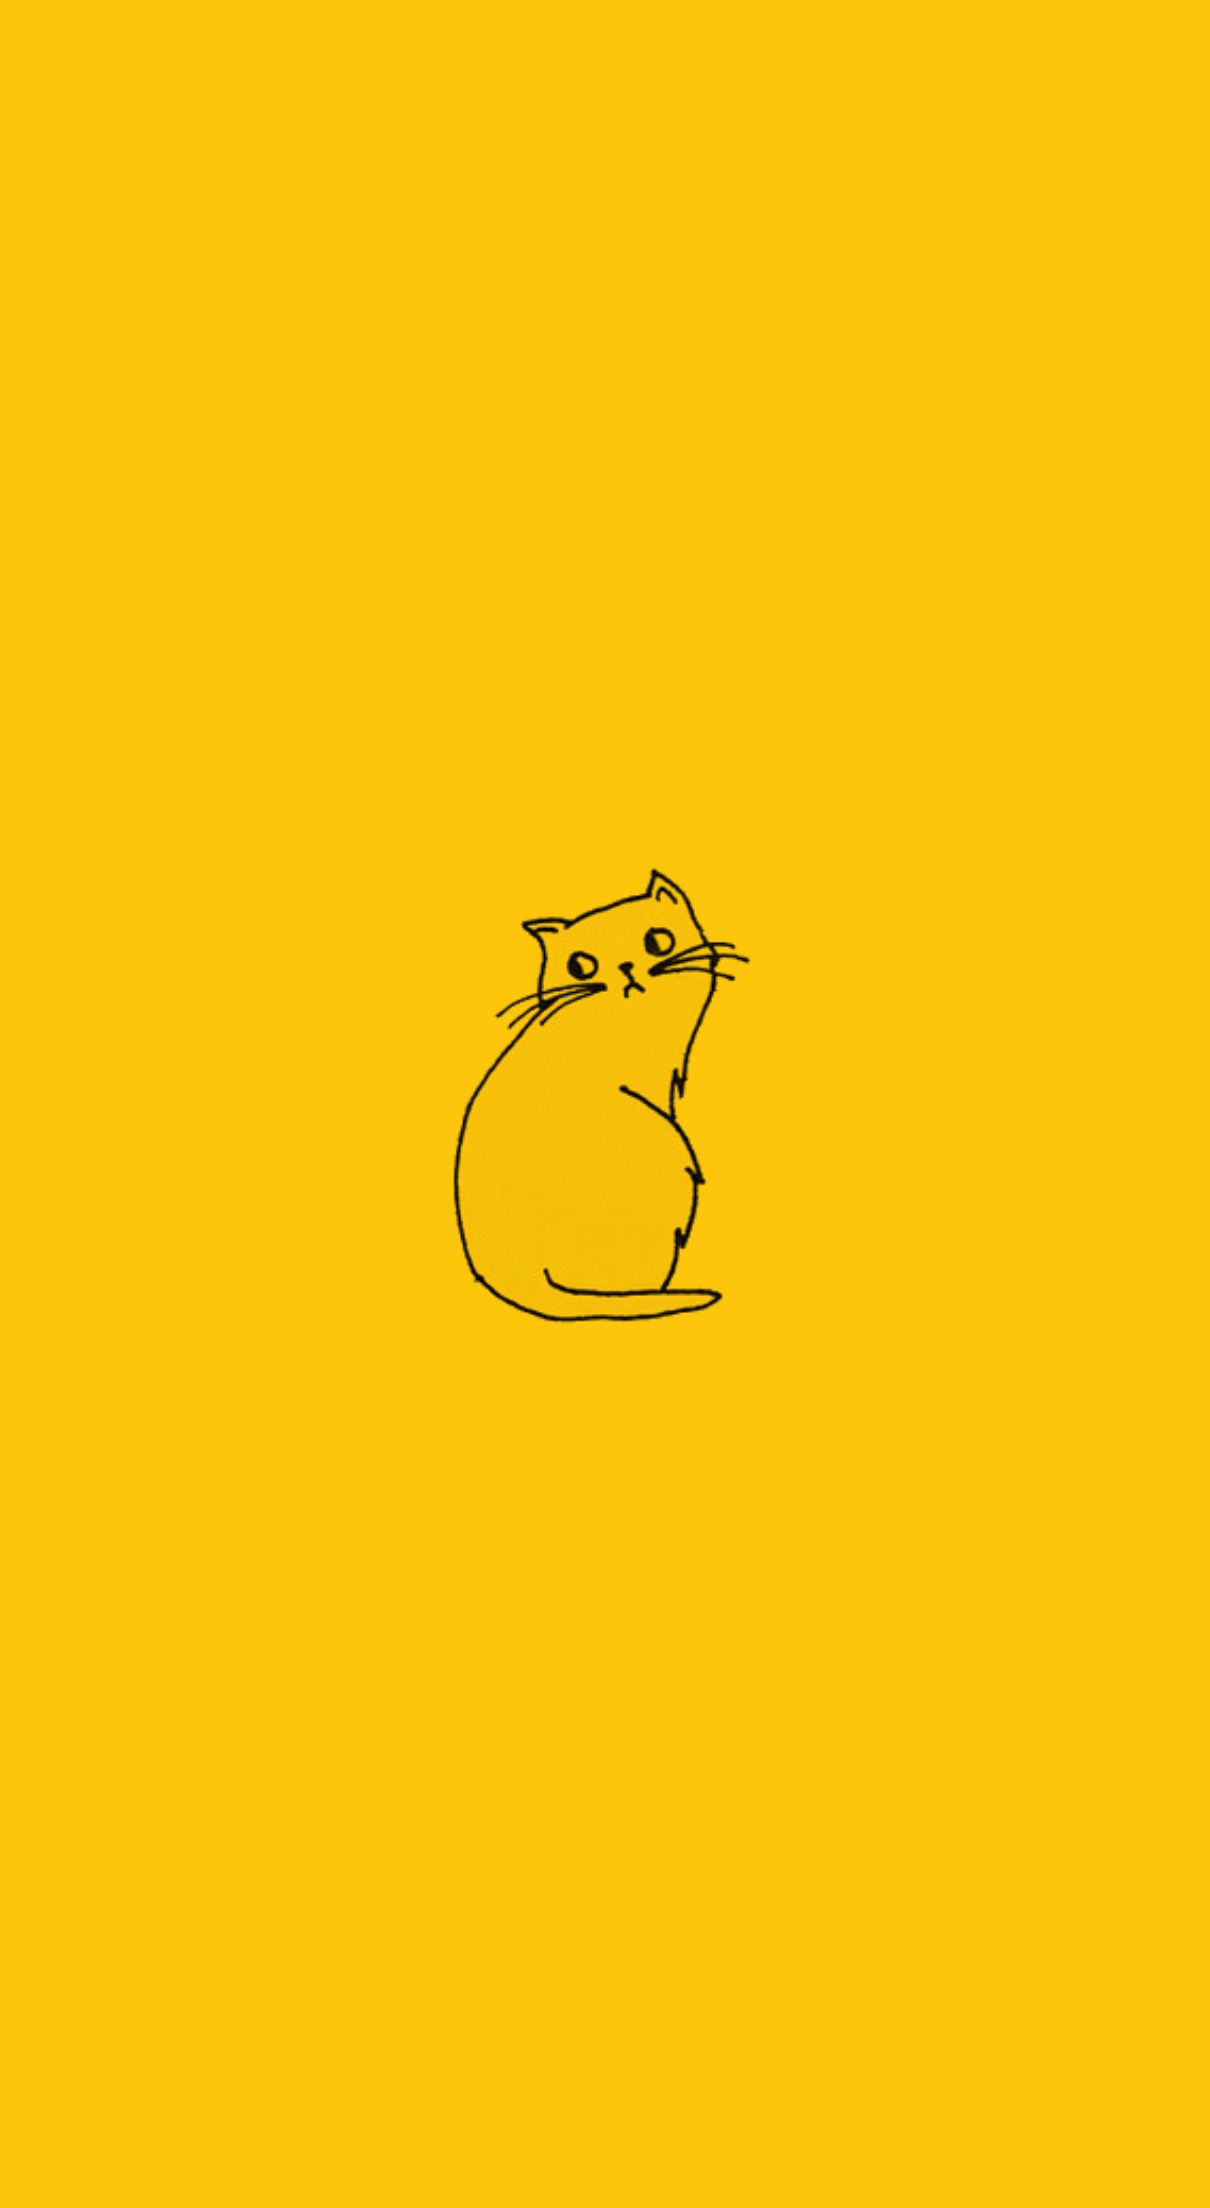 A yellow wallpaper with a simple cat - Yellow iphone, cat, light yellow